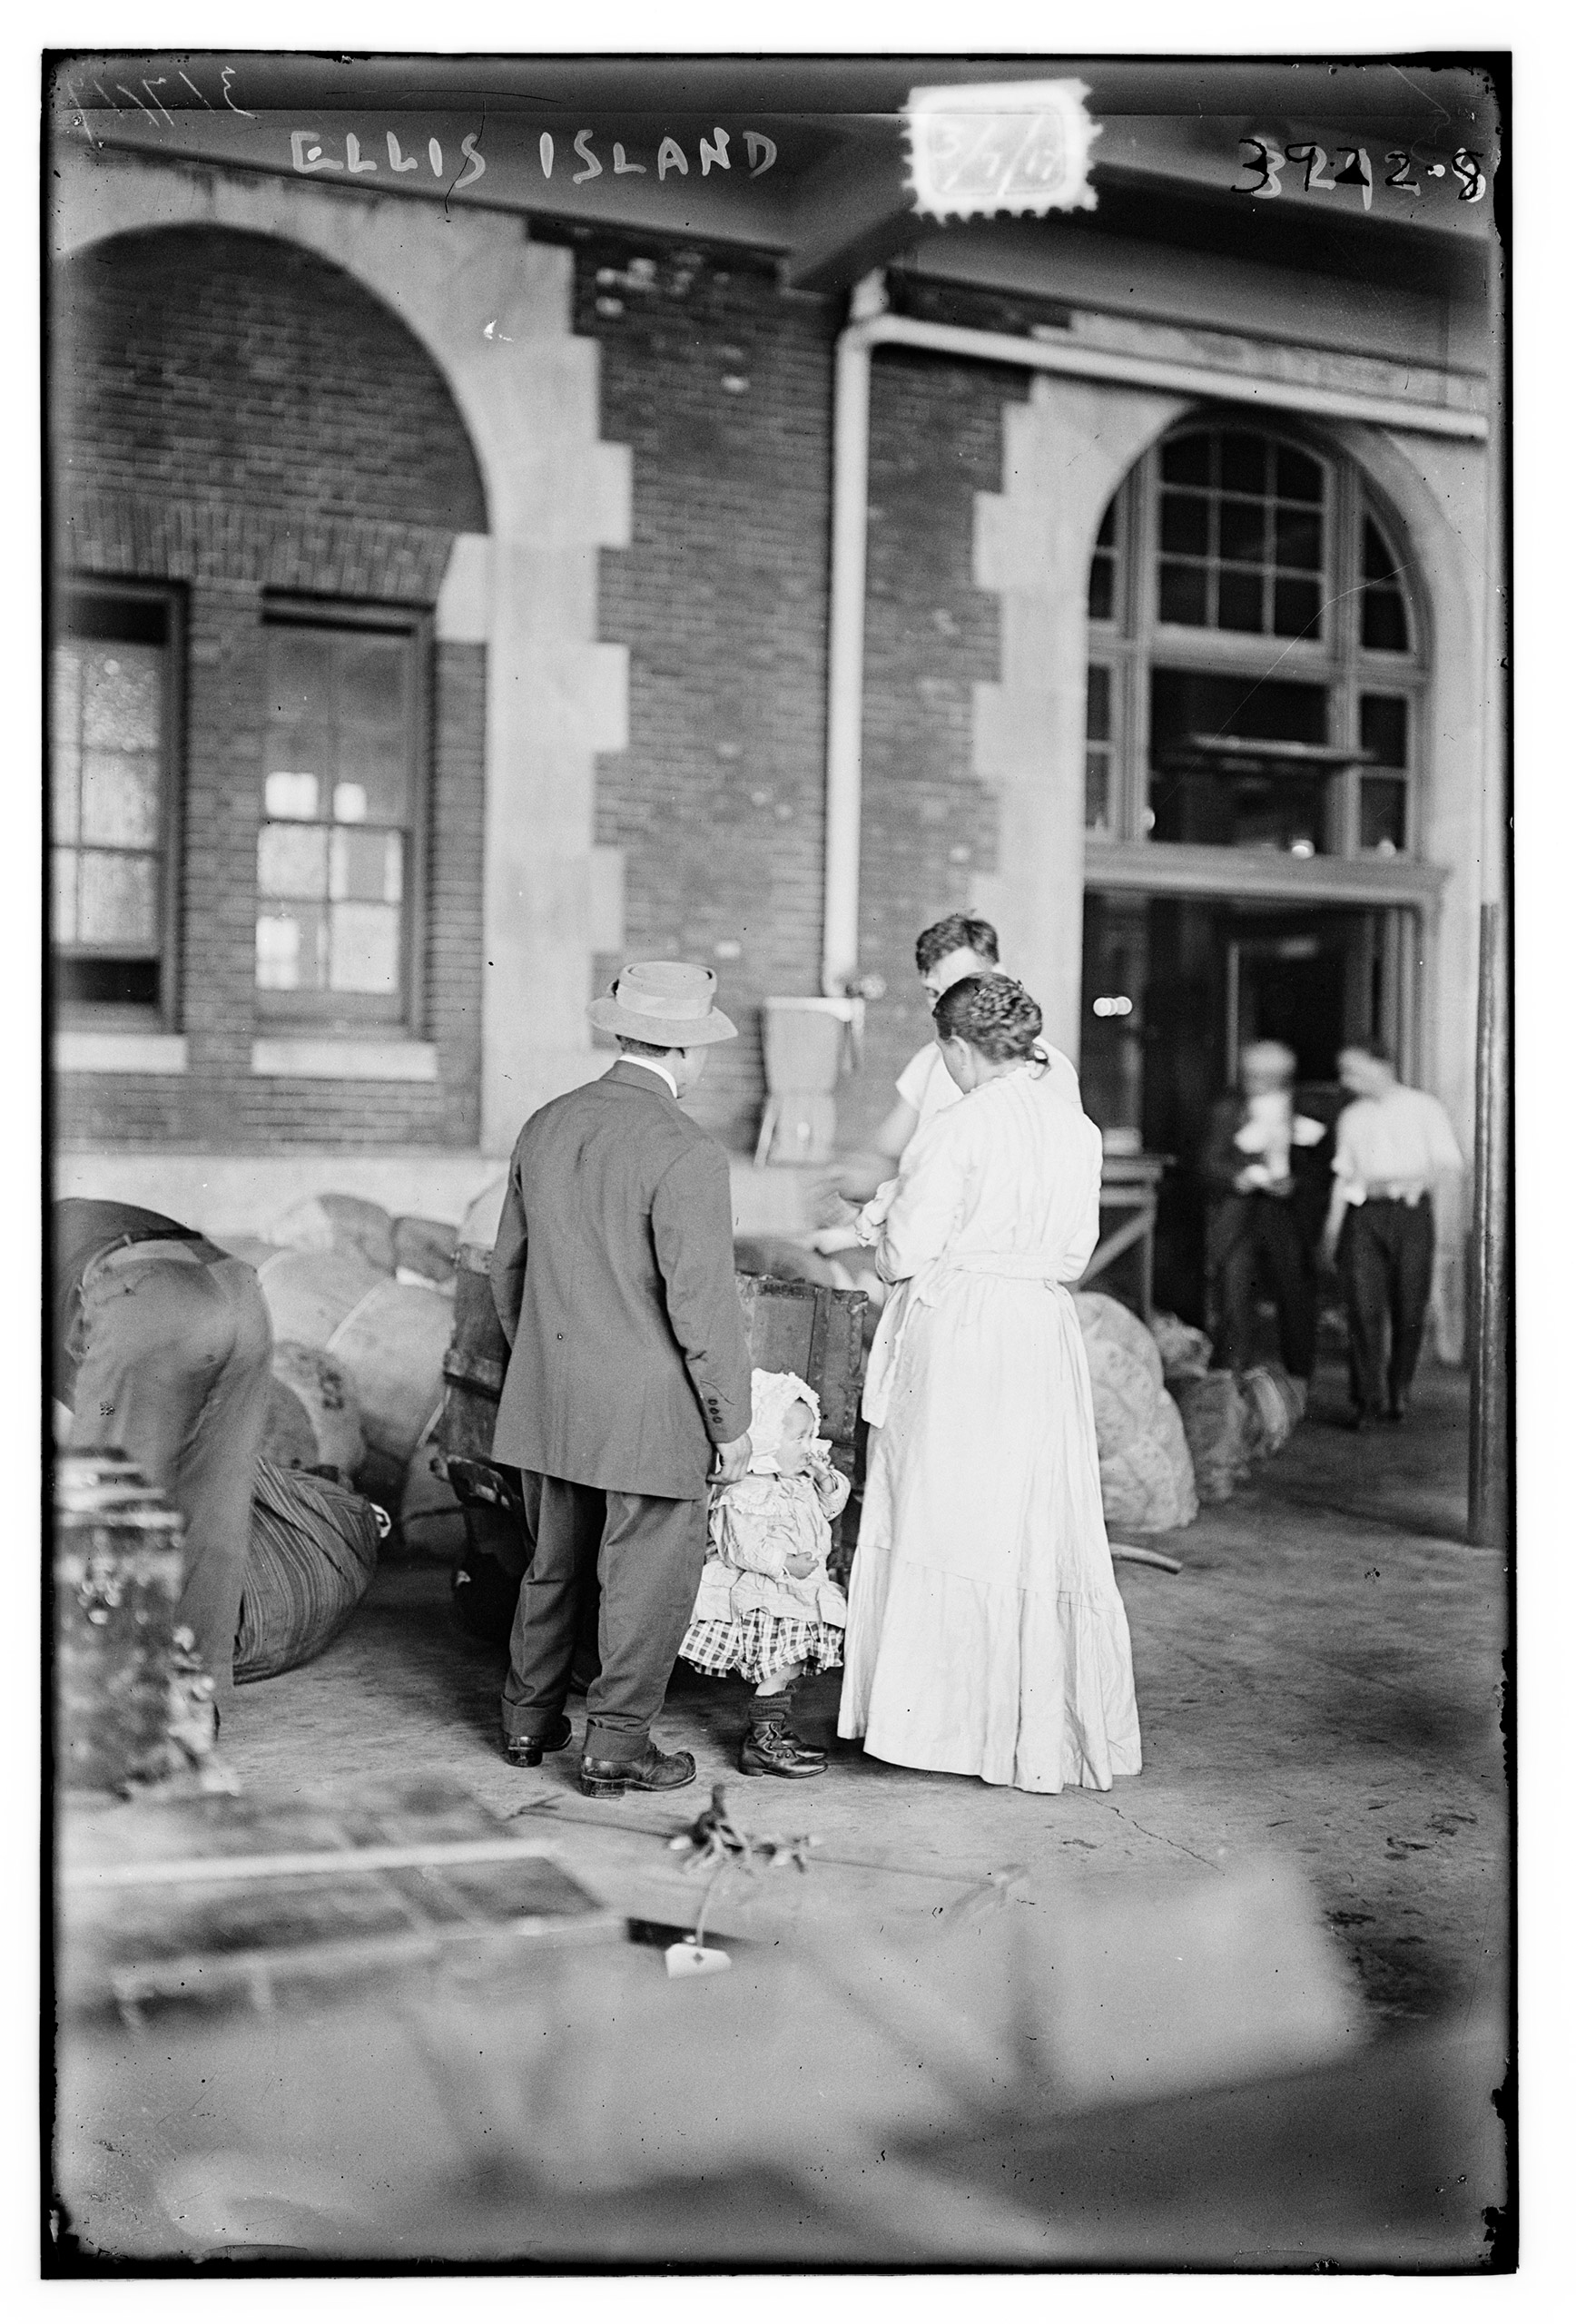 Immigrant family at Ellis Island. New York City. March 1917.